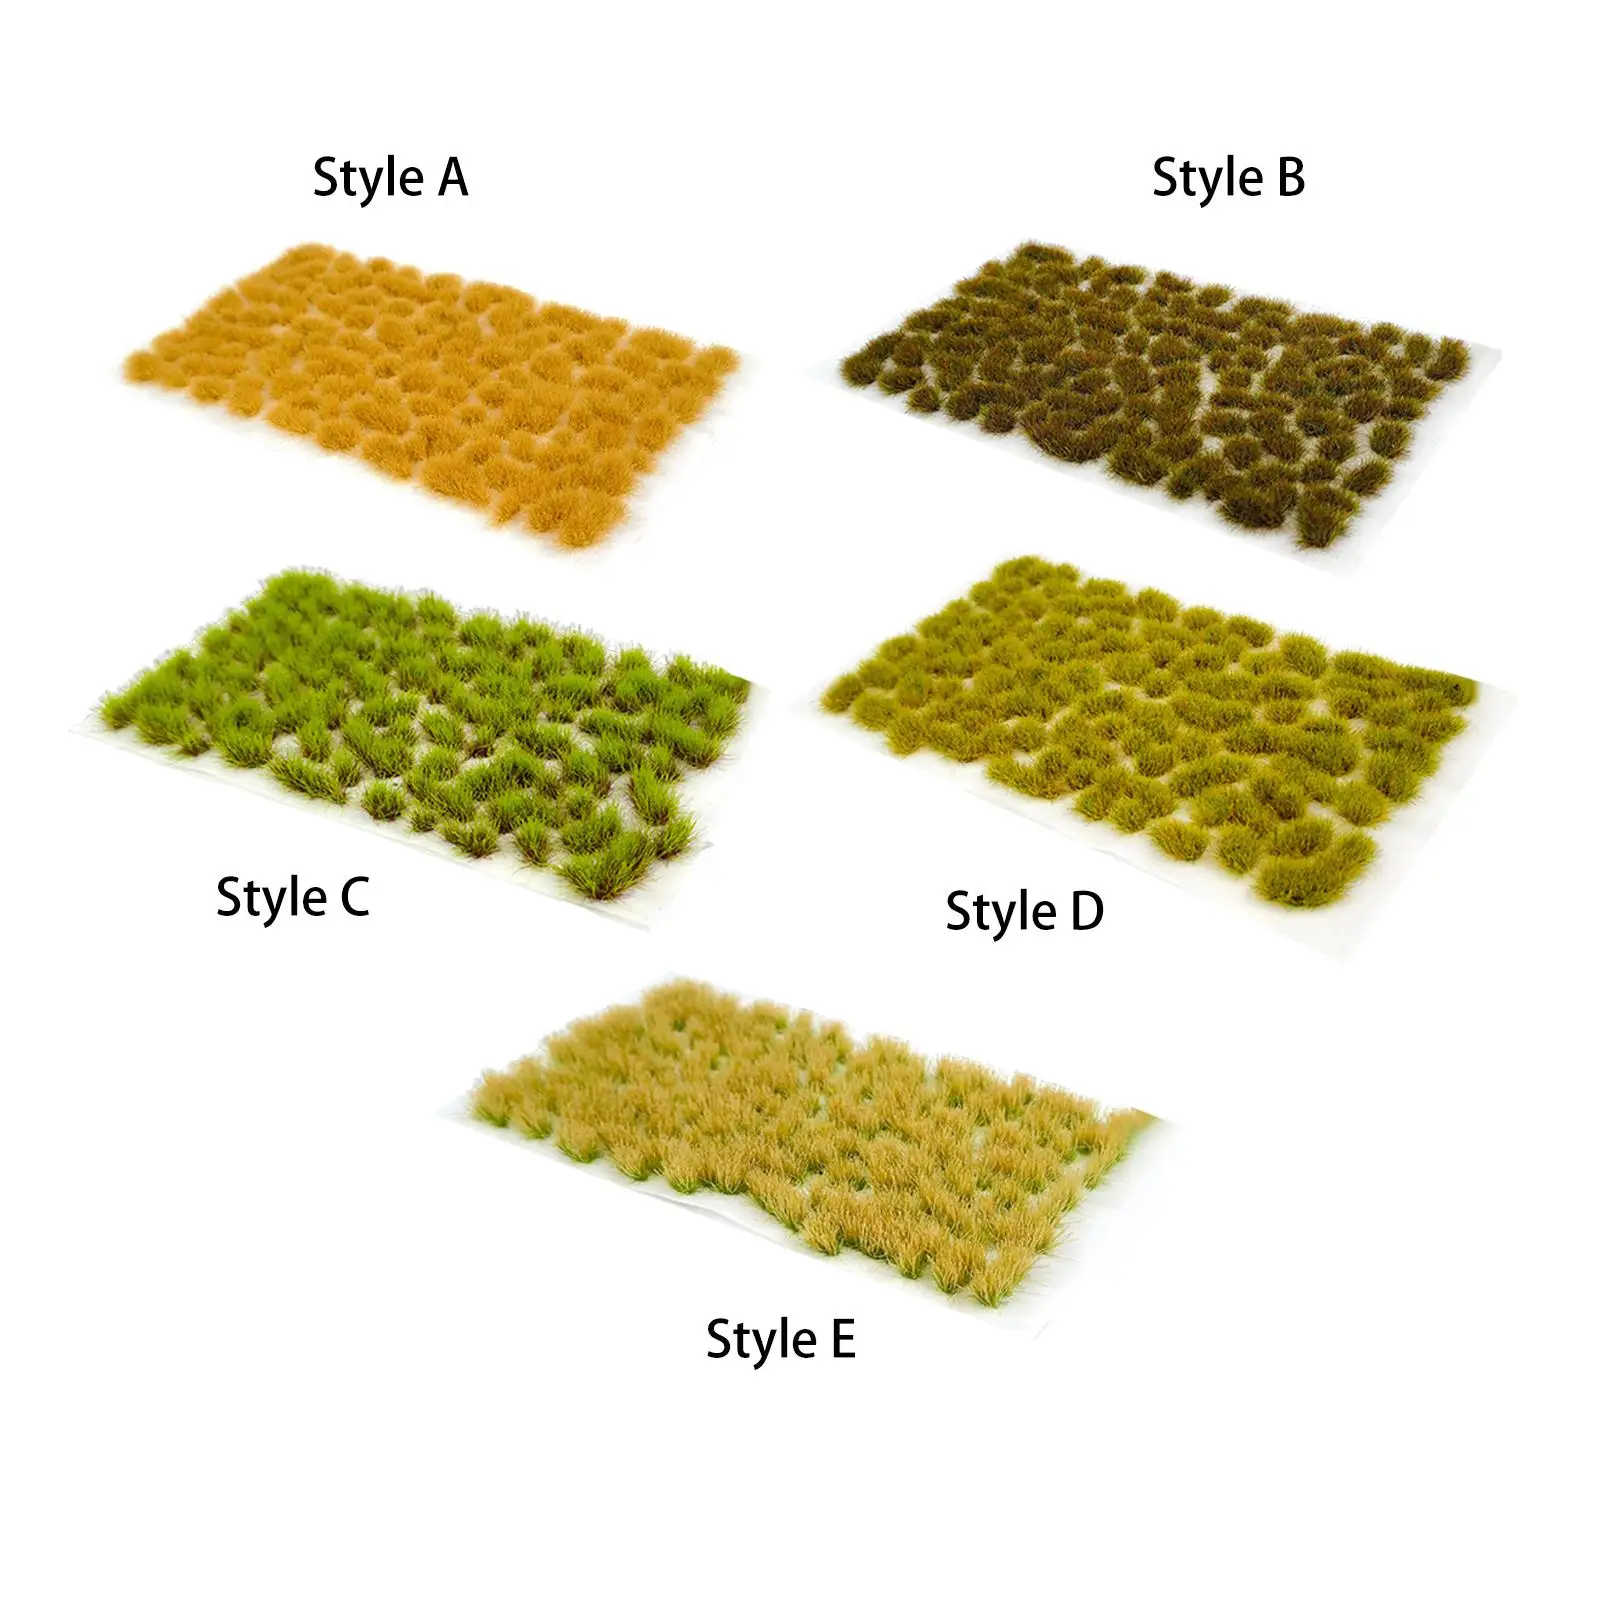 95x Large Cluster Grass Train Sand Table Model Material for DIY Landscape